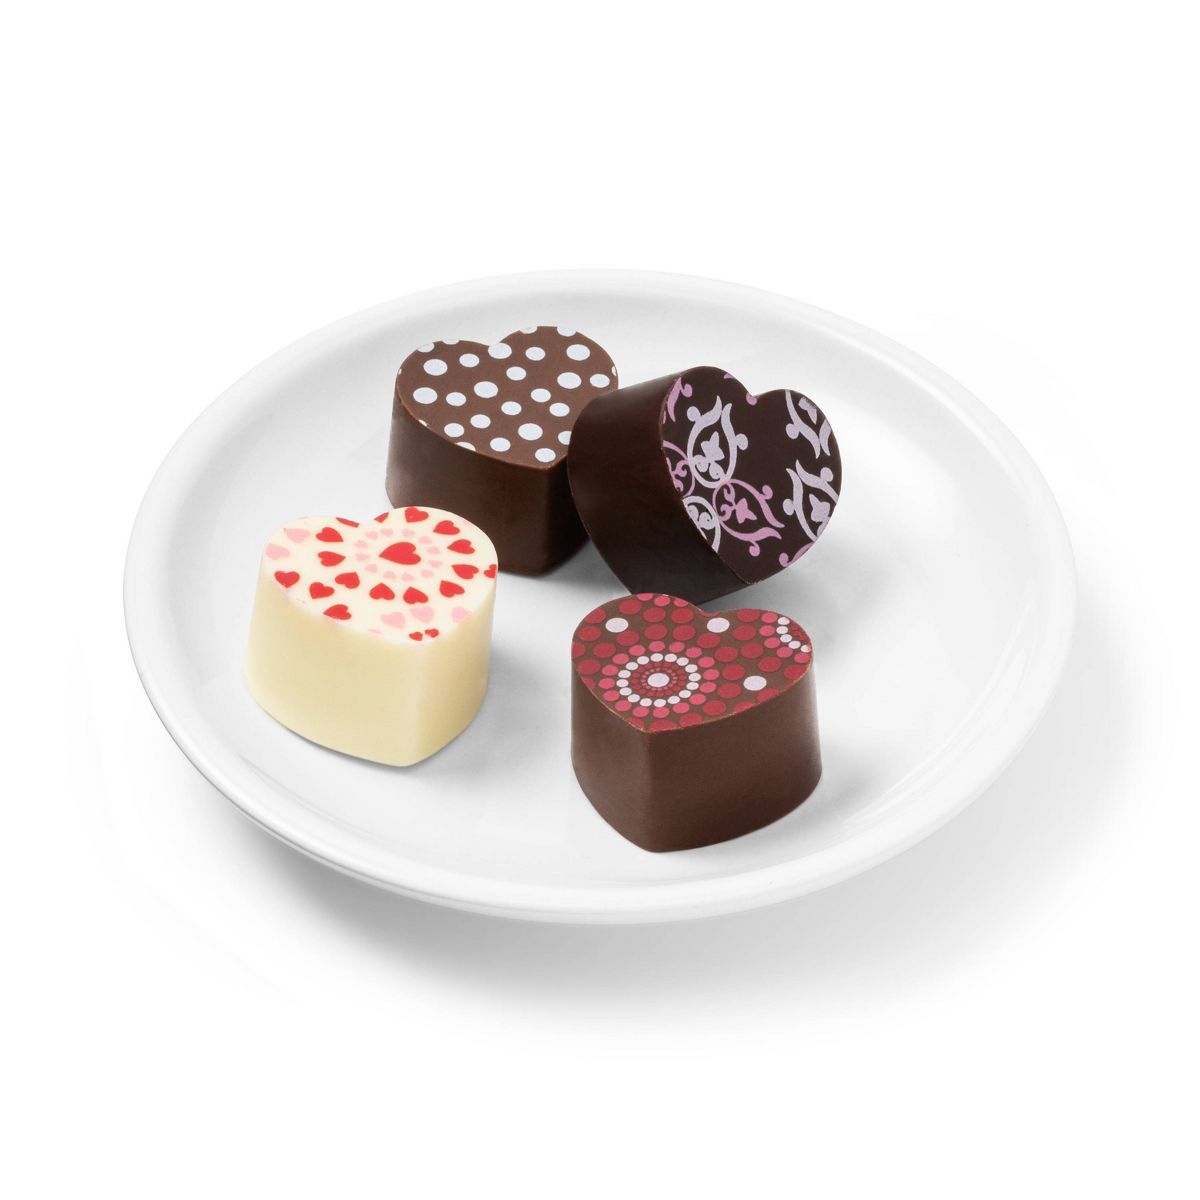 Valentine's Wine Bottle Truffle Box with Heart Shaped Truffles - 2oz/4ct - Favorite Day™ | Target